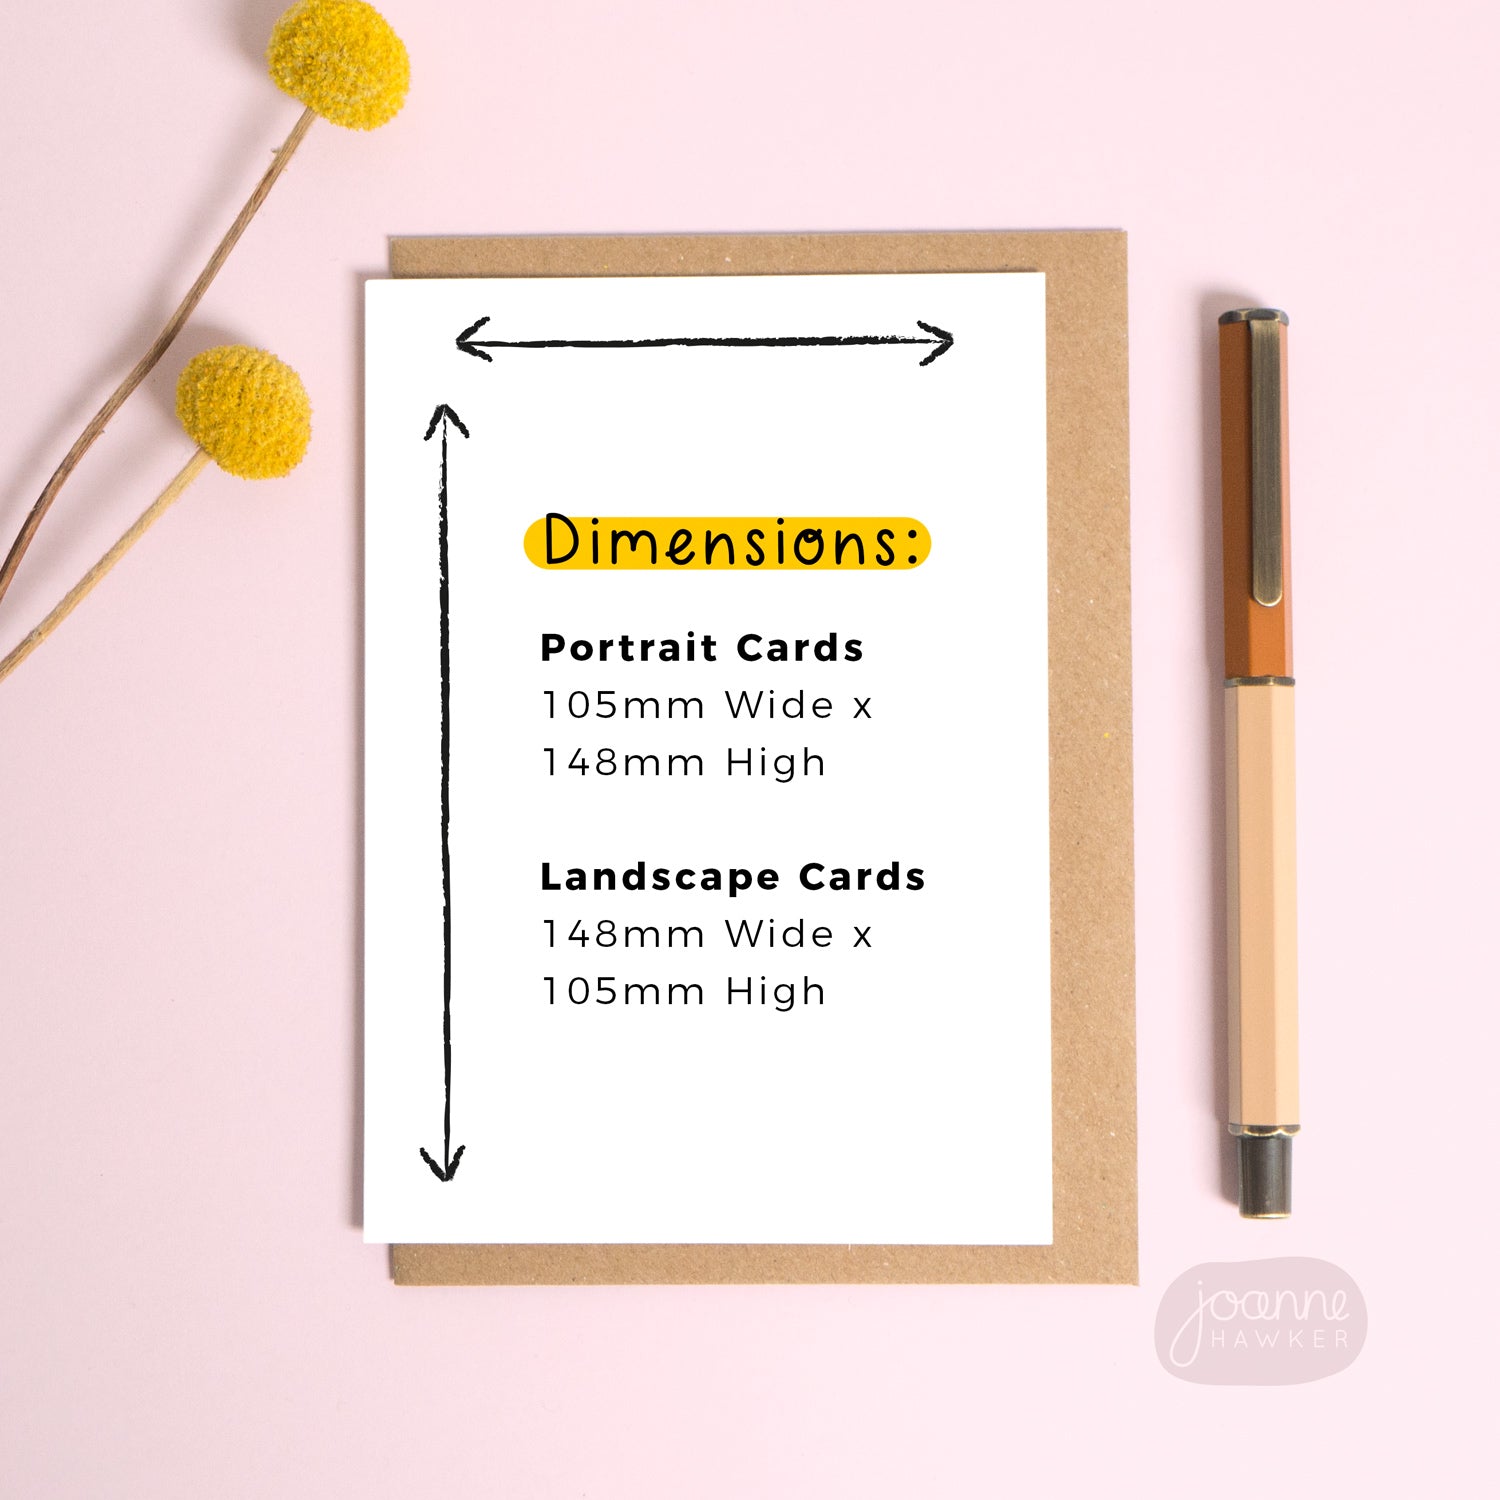 A blank card set on a pink background with a pop of yellow flowers and a pen for scale. The text on the card gives the dimensions in both portrait and landscape format.